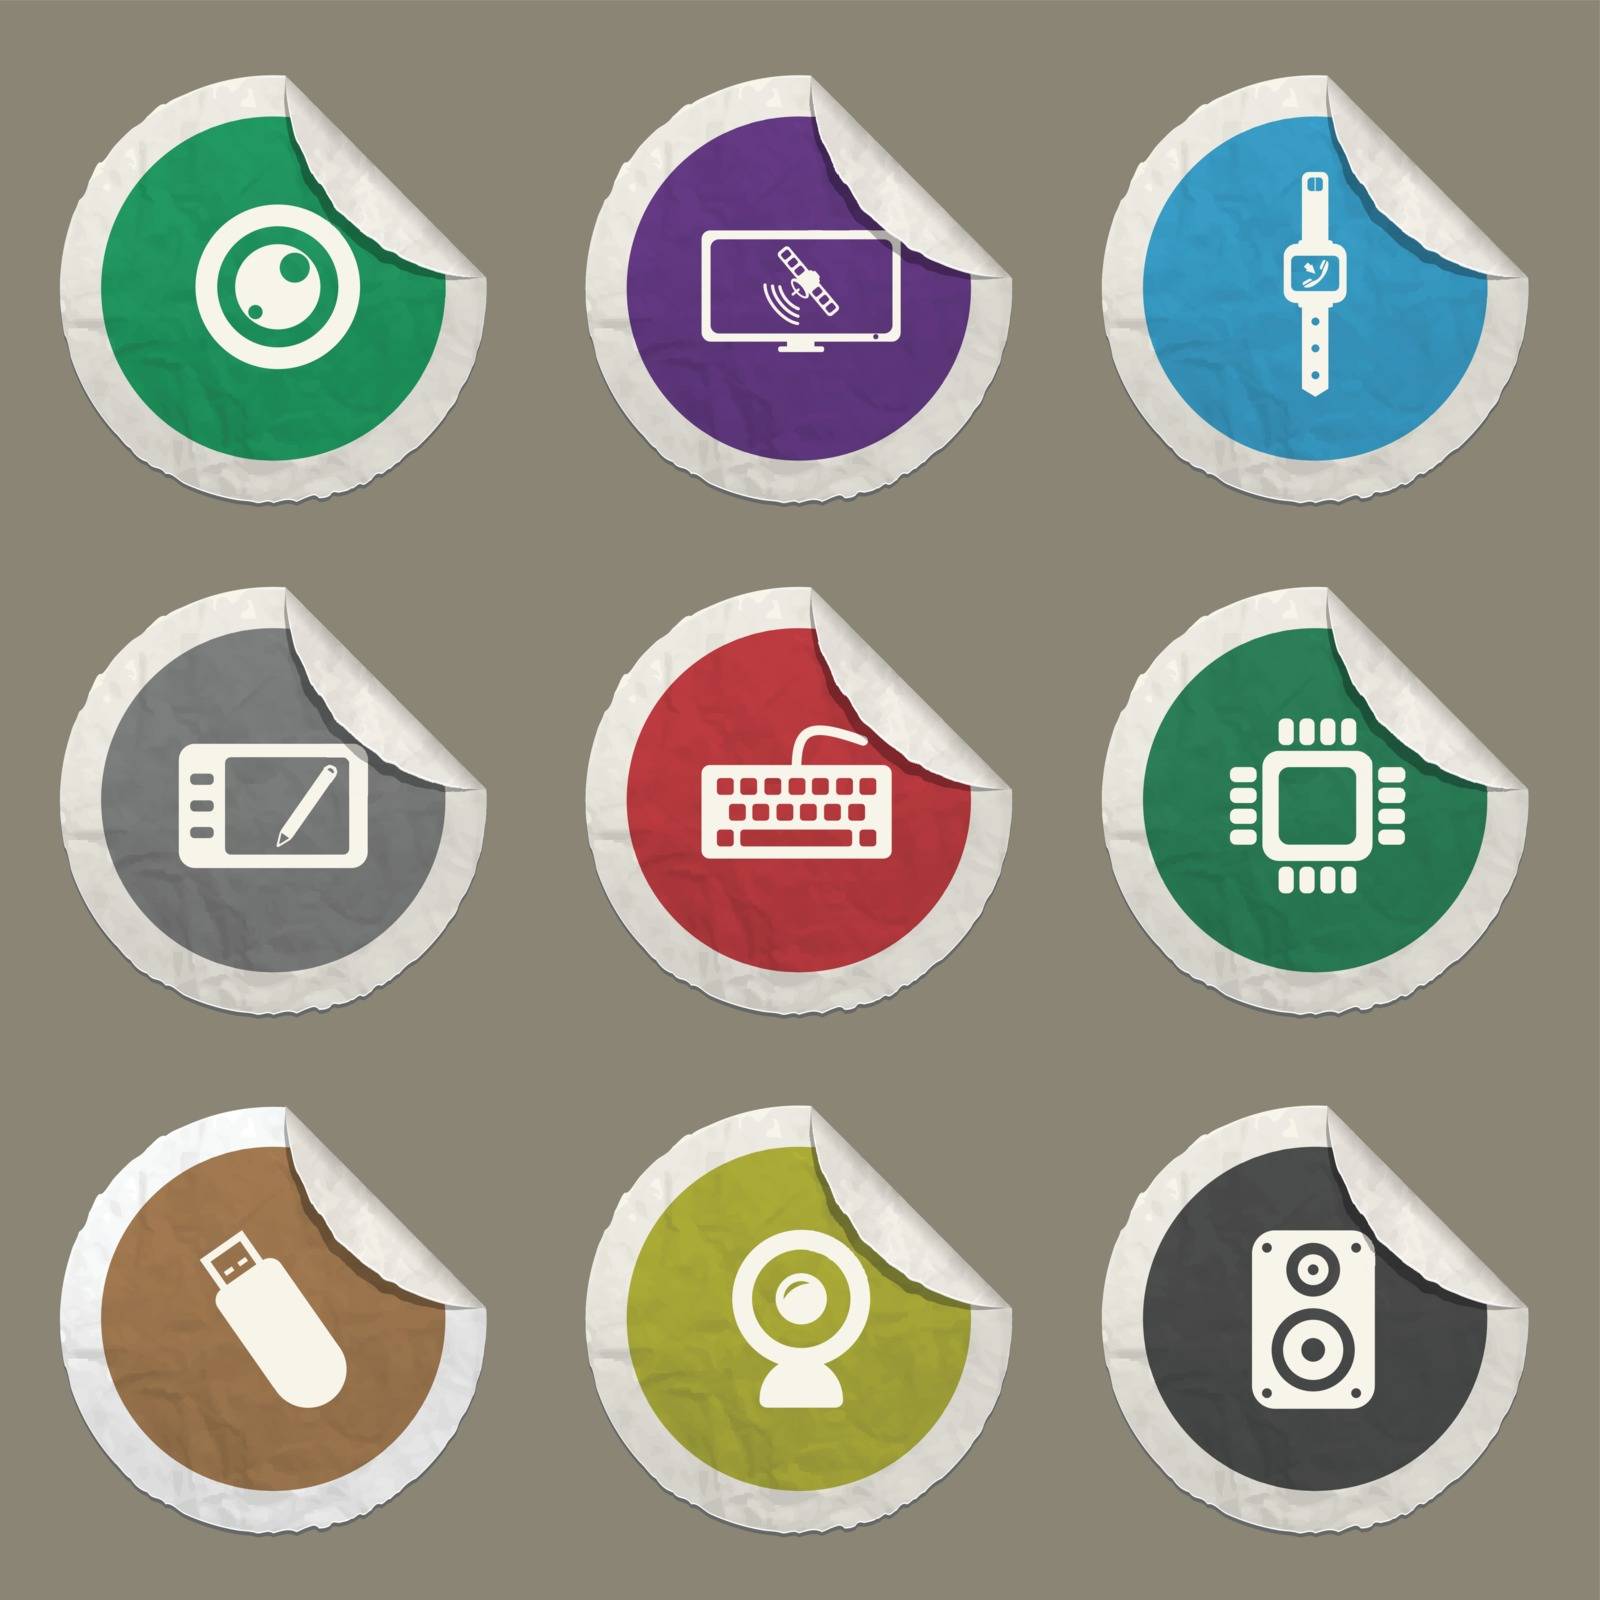 Gadgets icons set for web sites and user interface